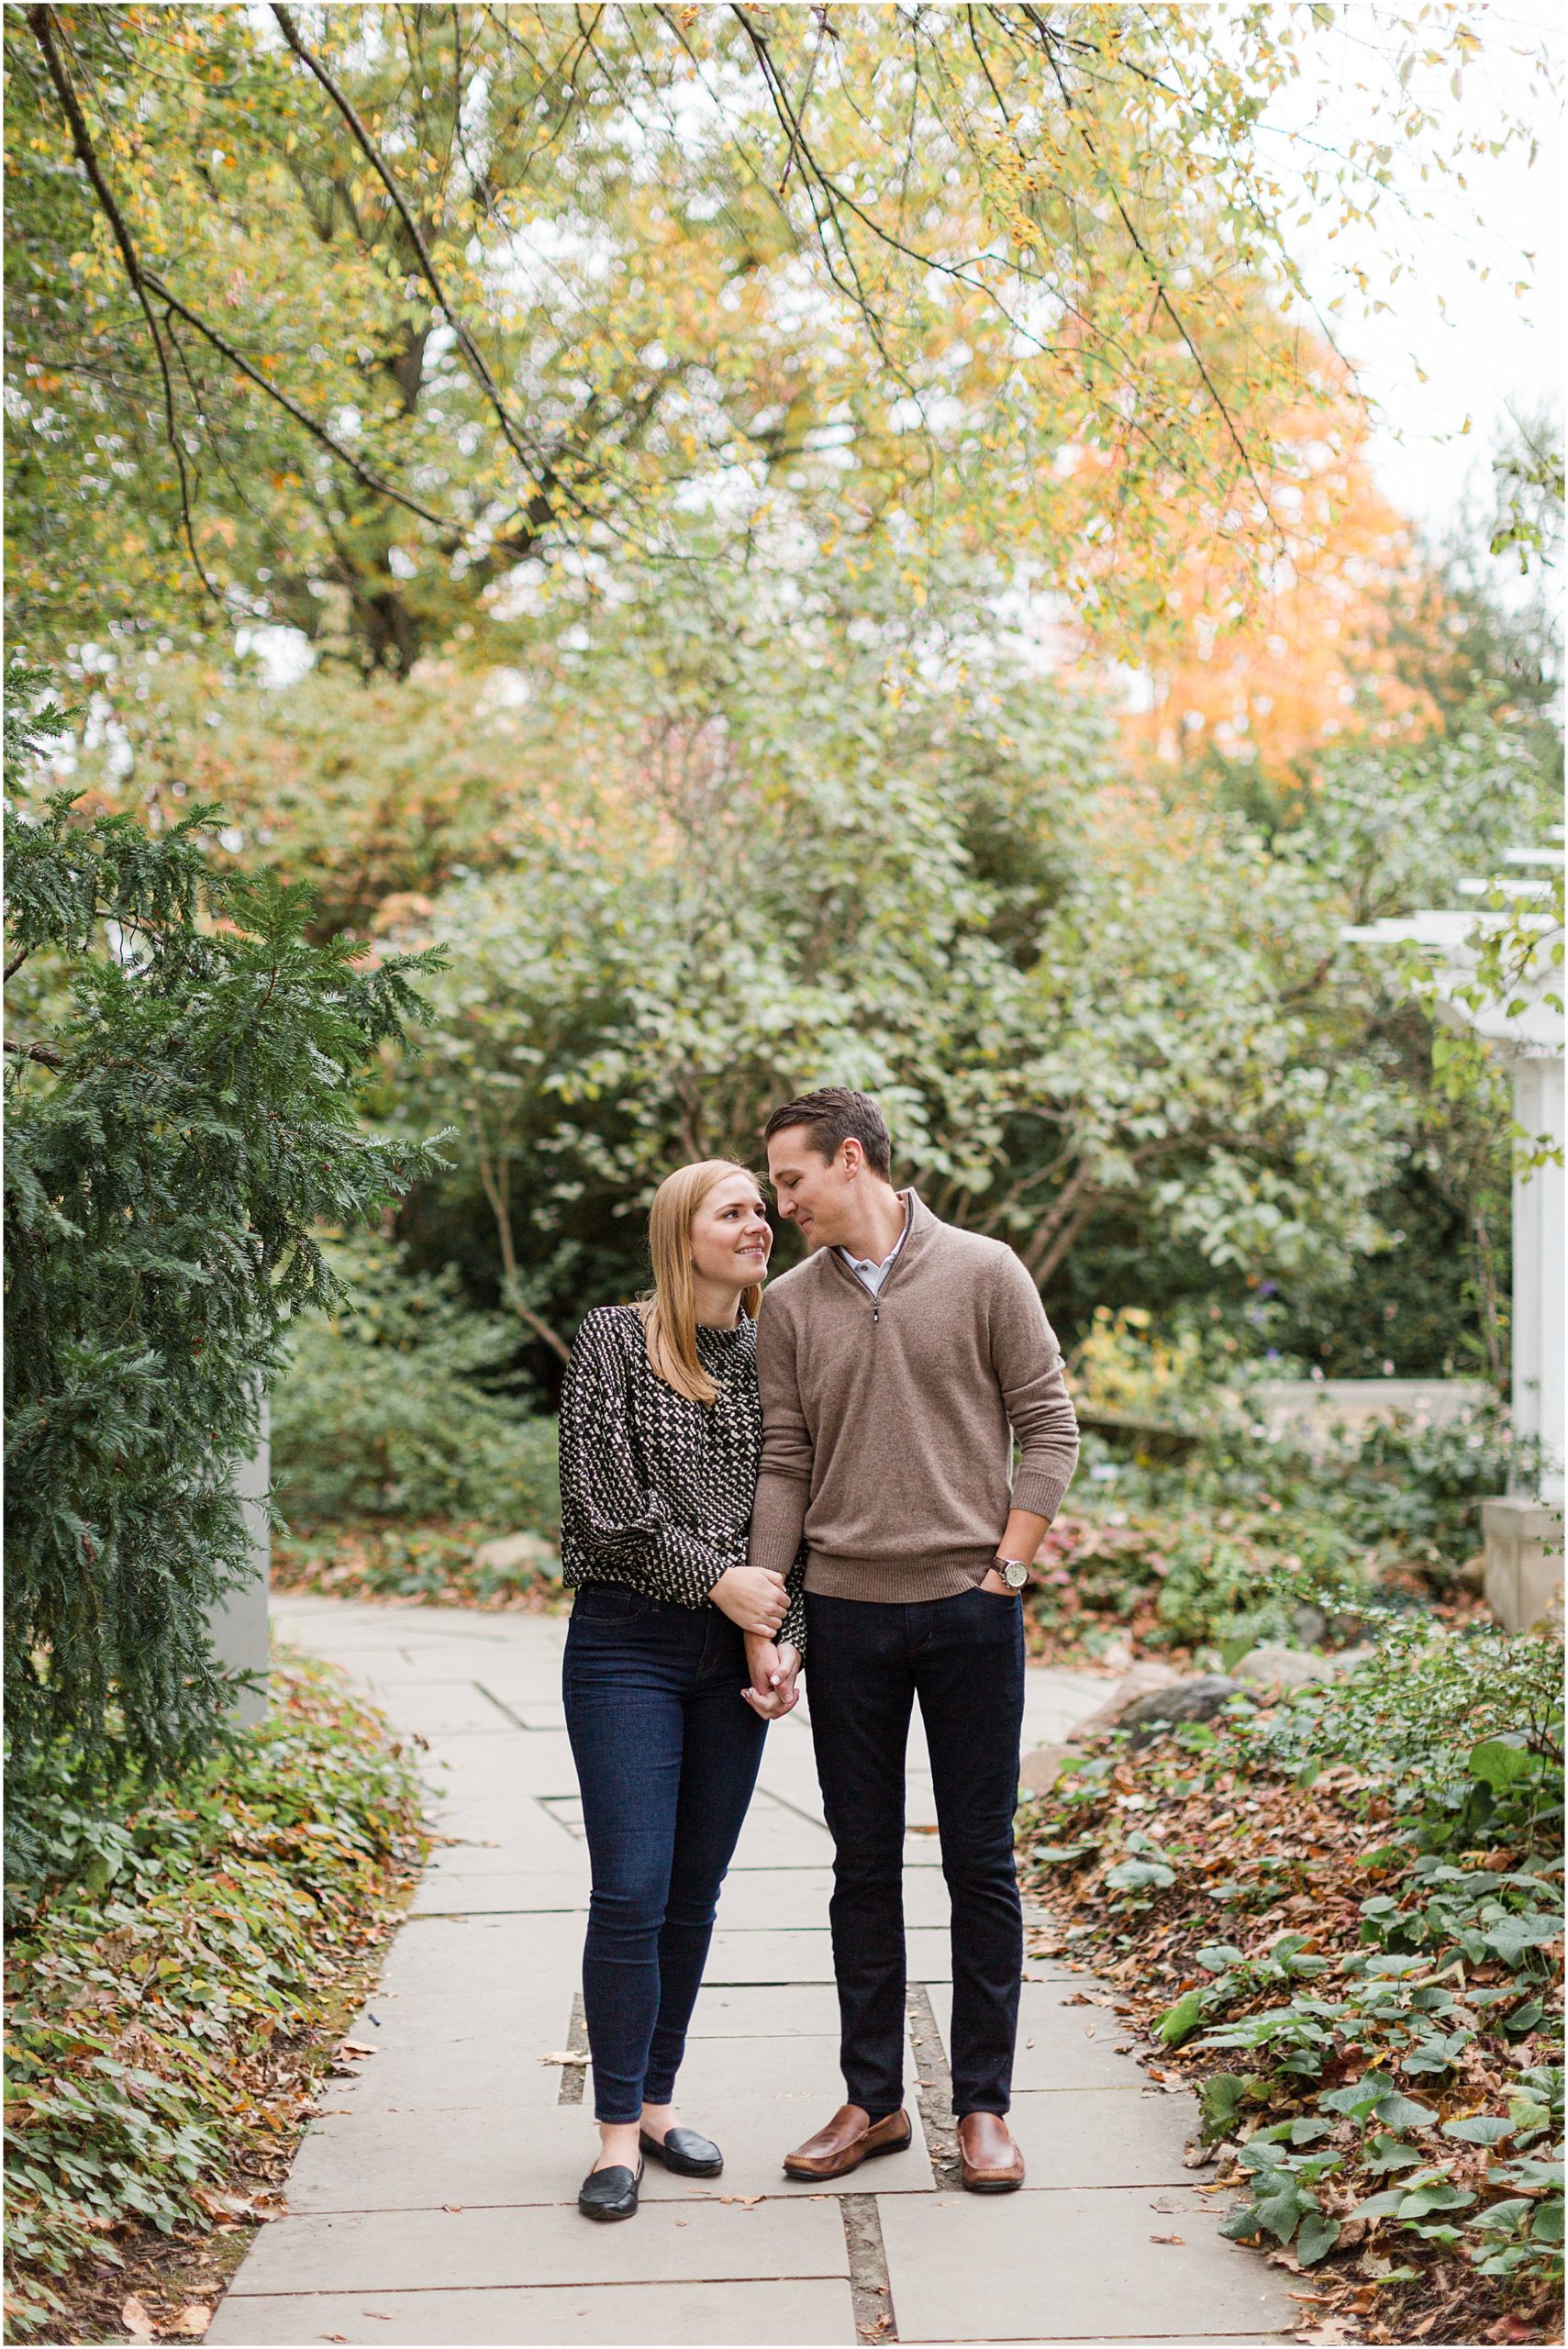 Autumn Newfields Engagement Session_0013.jpg